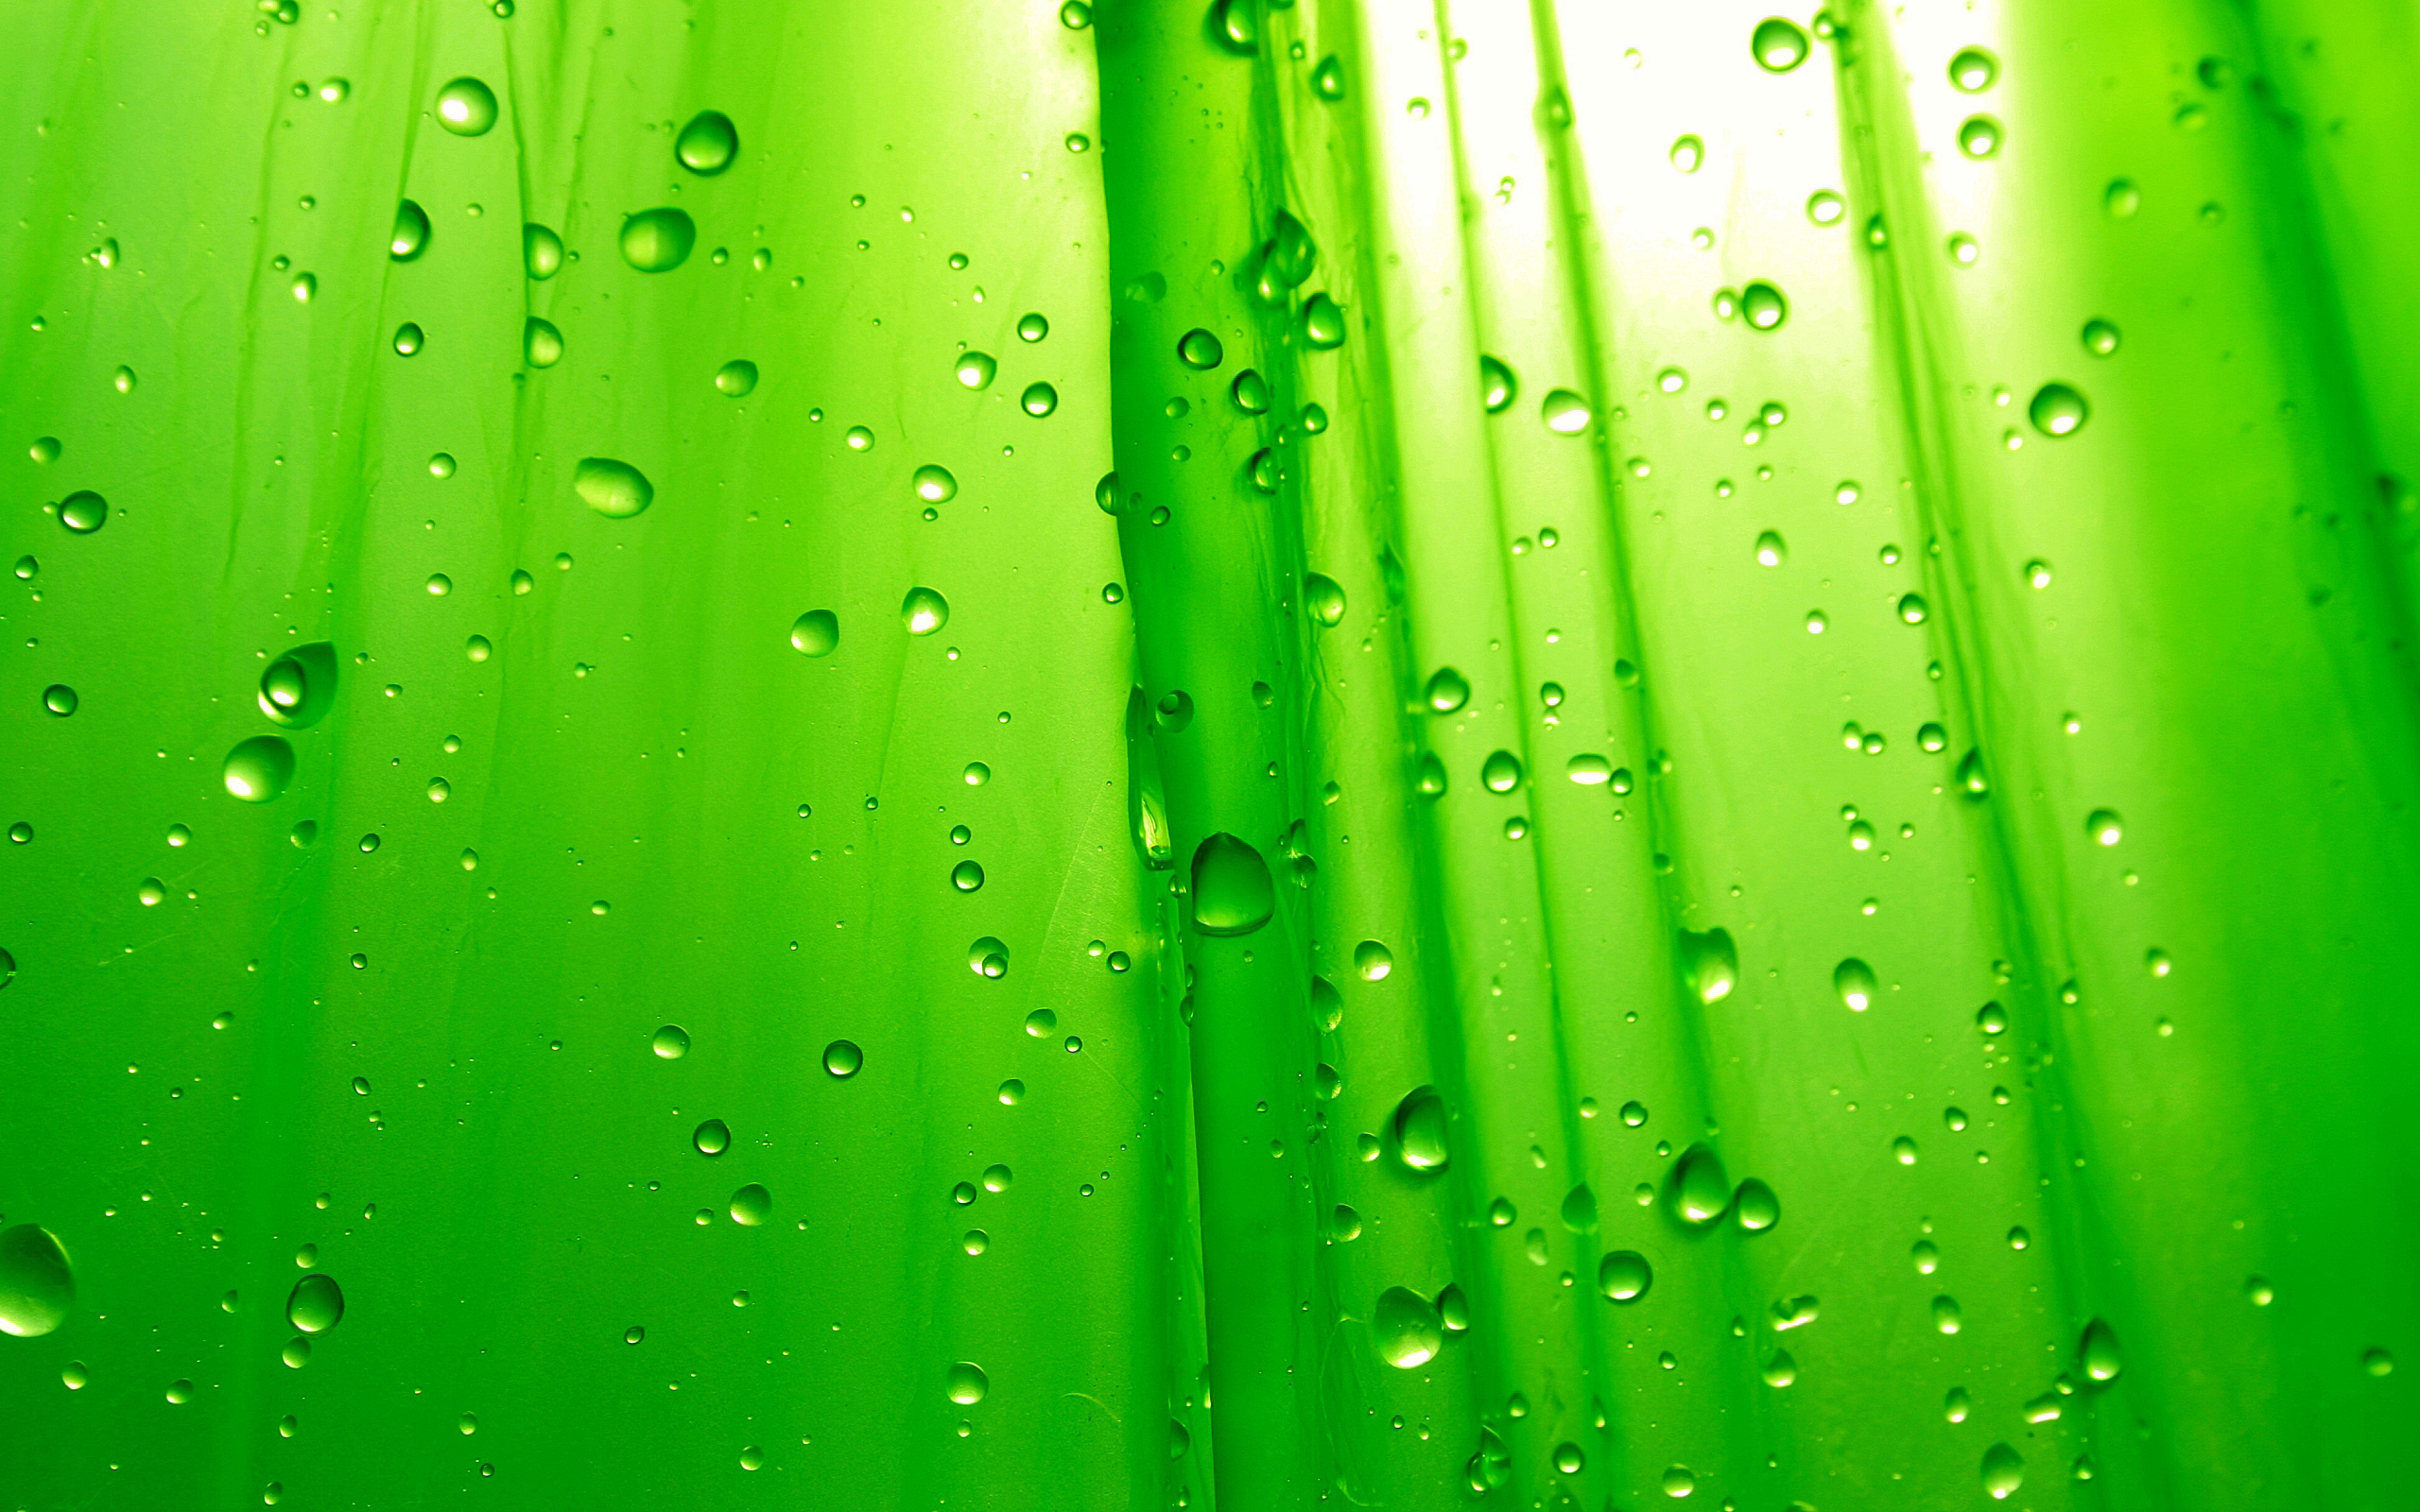 Simply Green Water HD Wallpaper Picture For Your PC Desktop